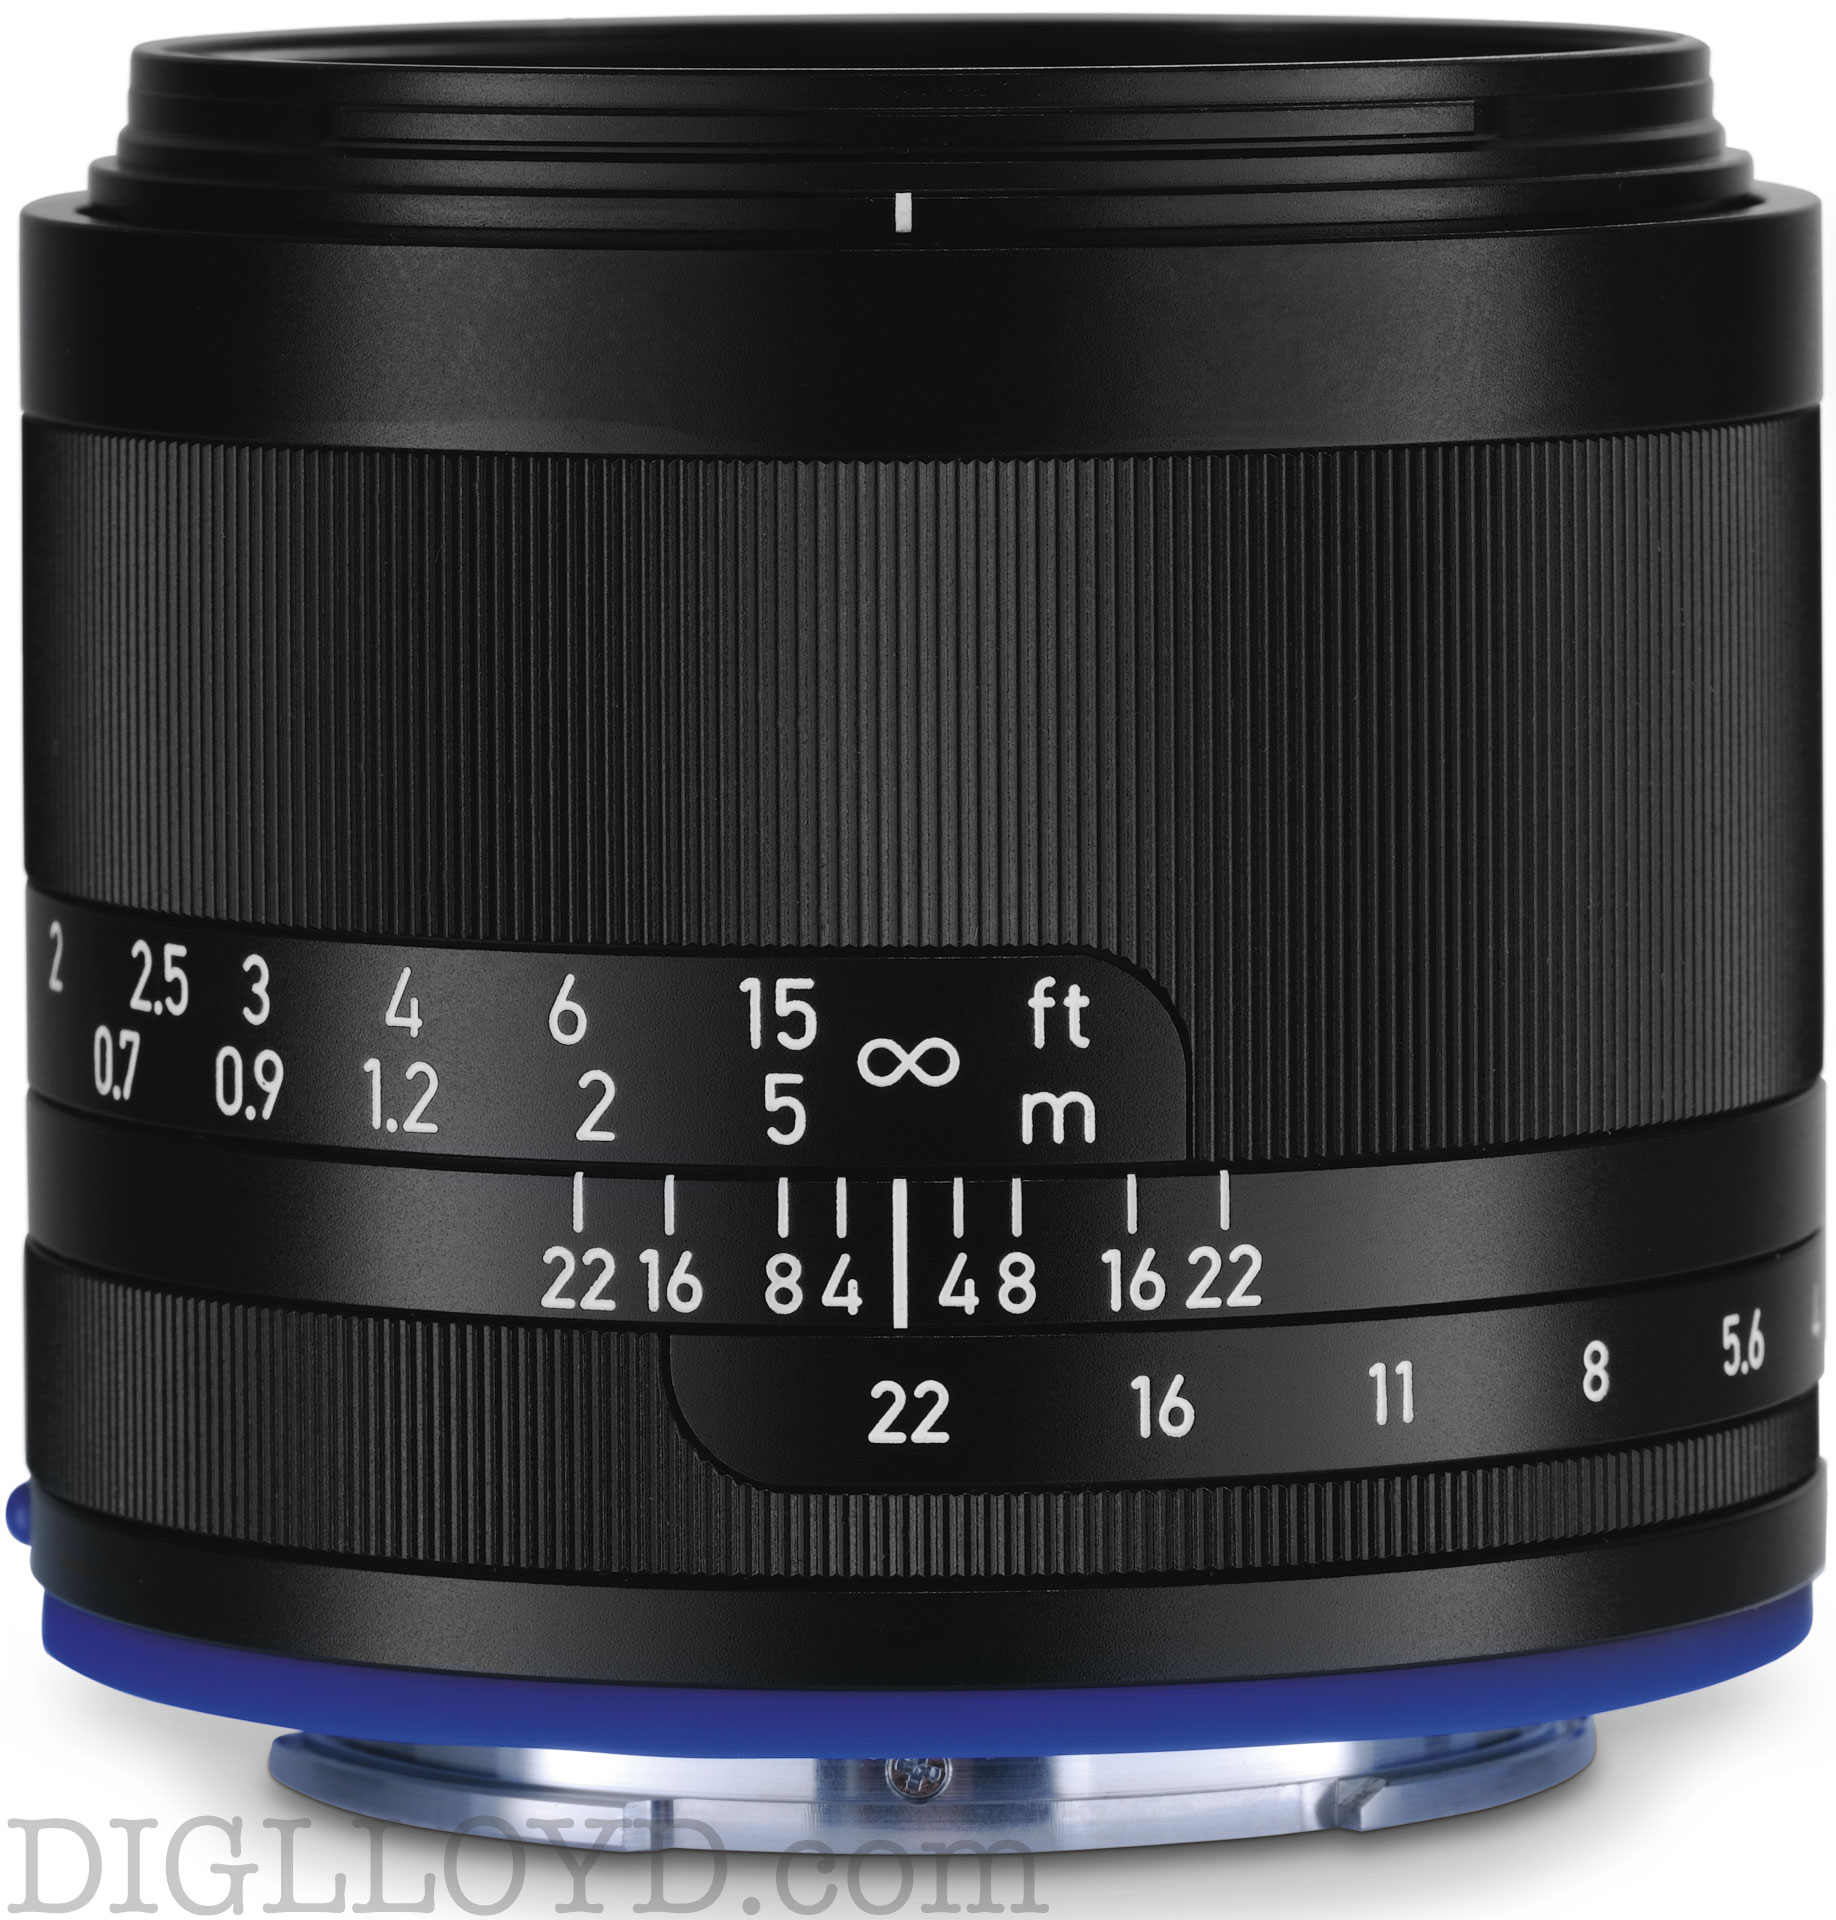 image of Zeiss Loxia 35mm f/2 Biogon